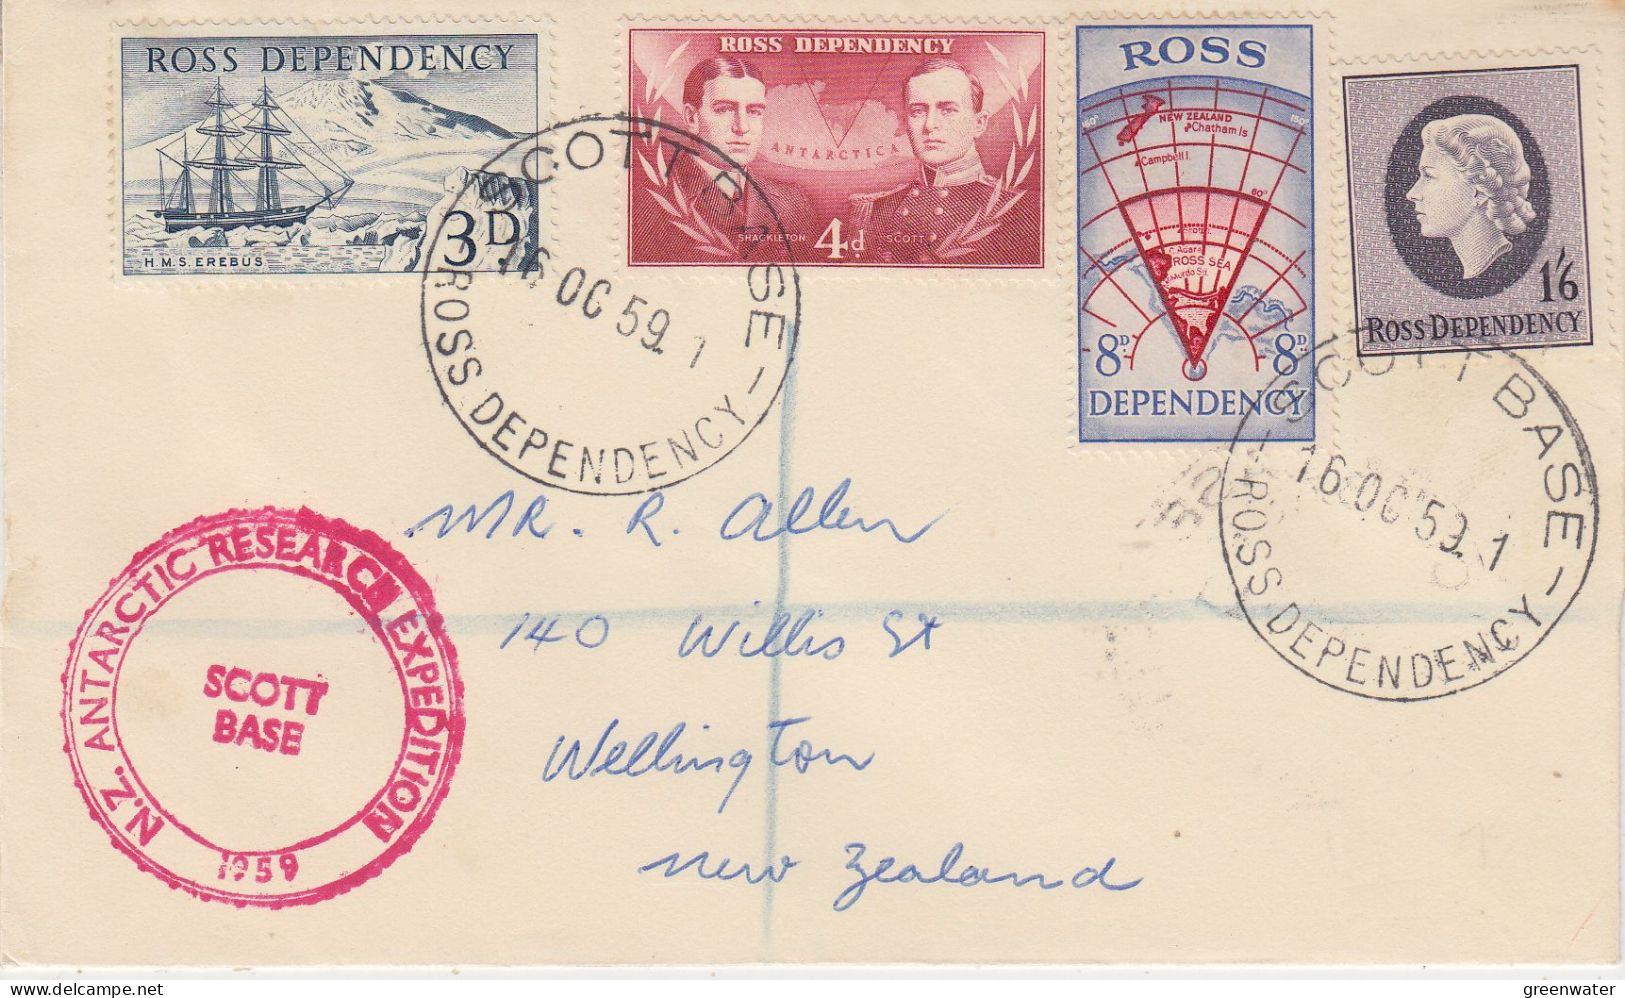 Ross Dependency 1959 NZ Antarctic Research Expedition Registered Cover  Ca Scott Base 16 OCT 1959 (SO235) - Briefe U. Dokumente